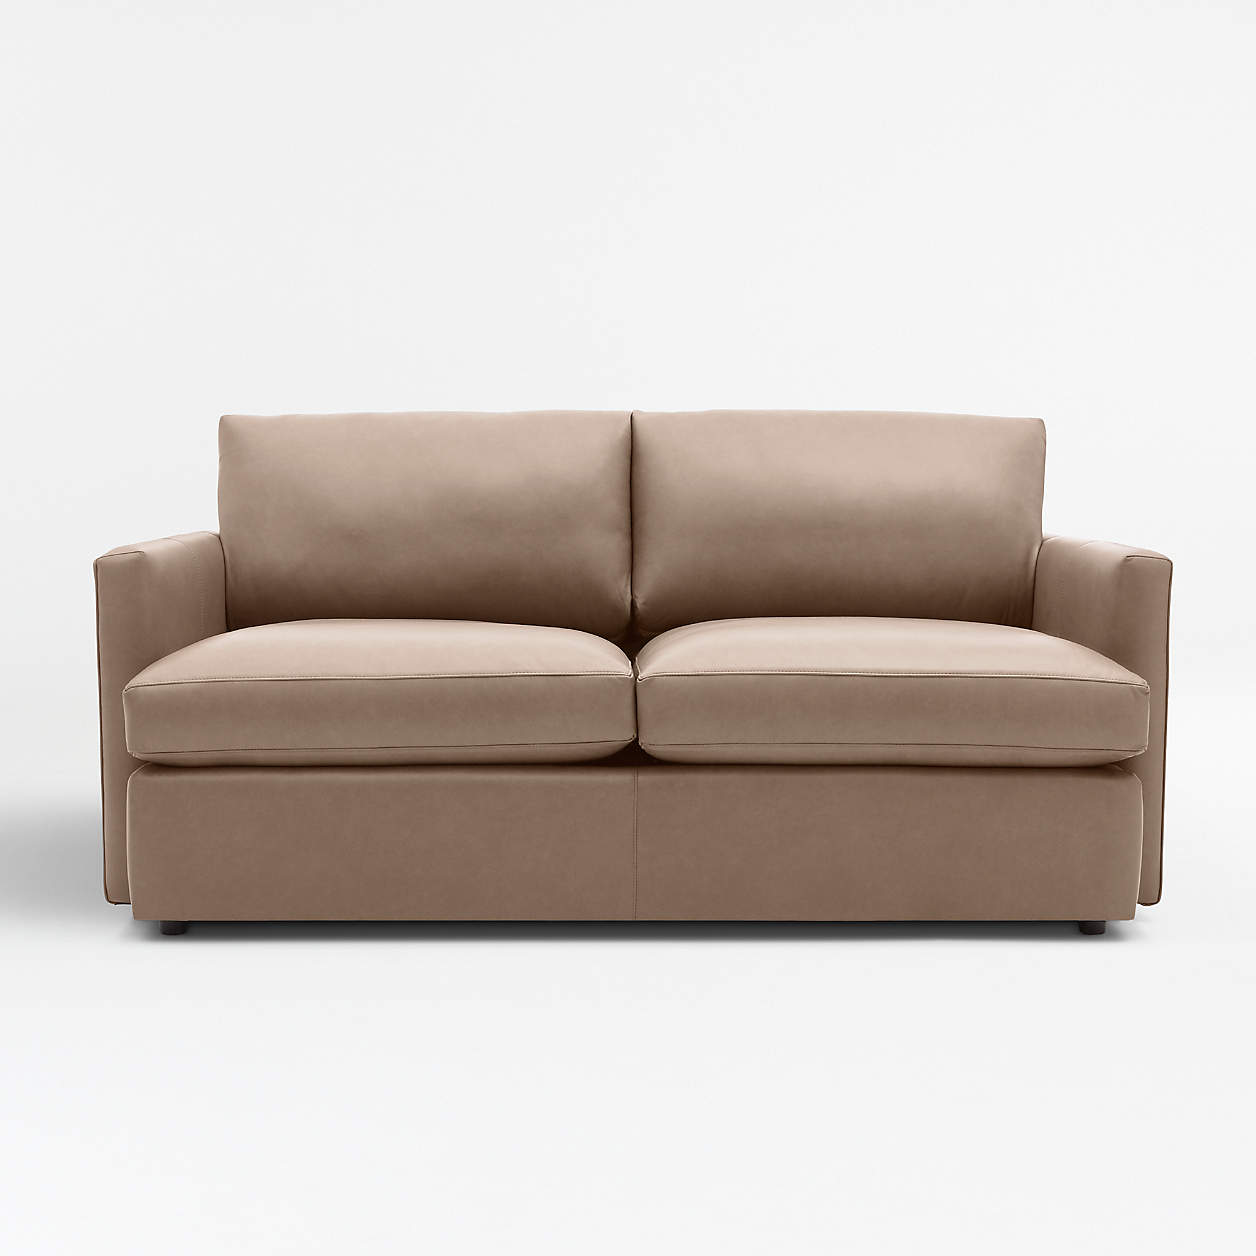 Lounge II Leather Apartment Sofa + Reviews Crate and Barrel